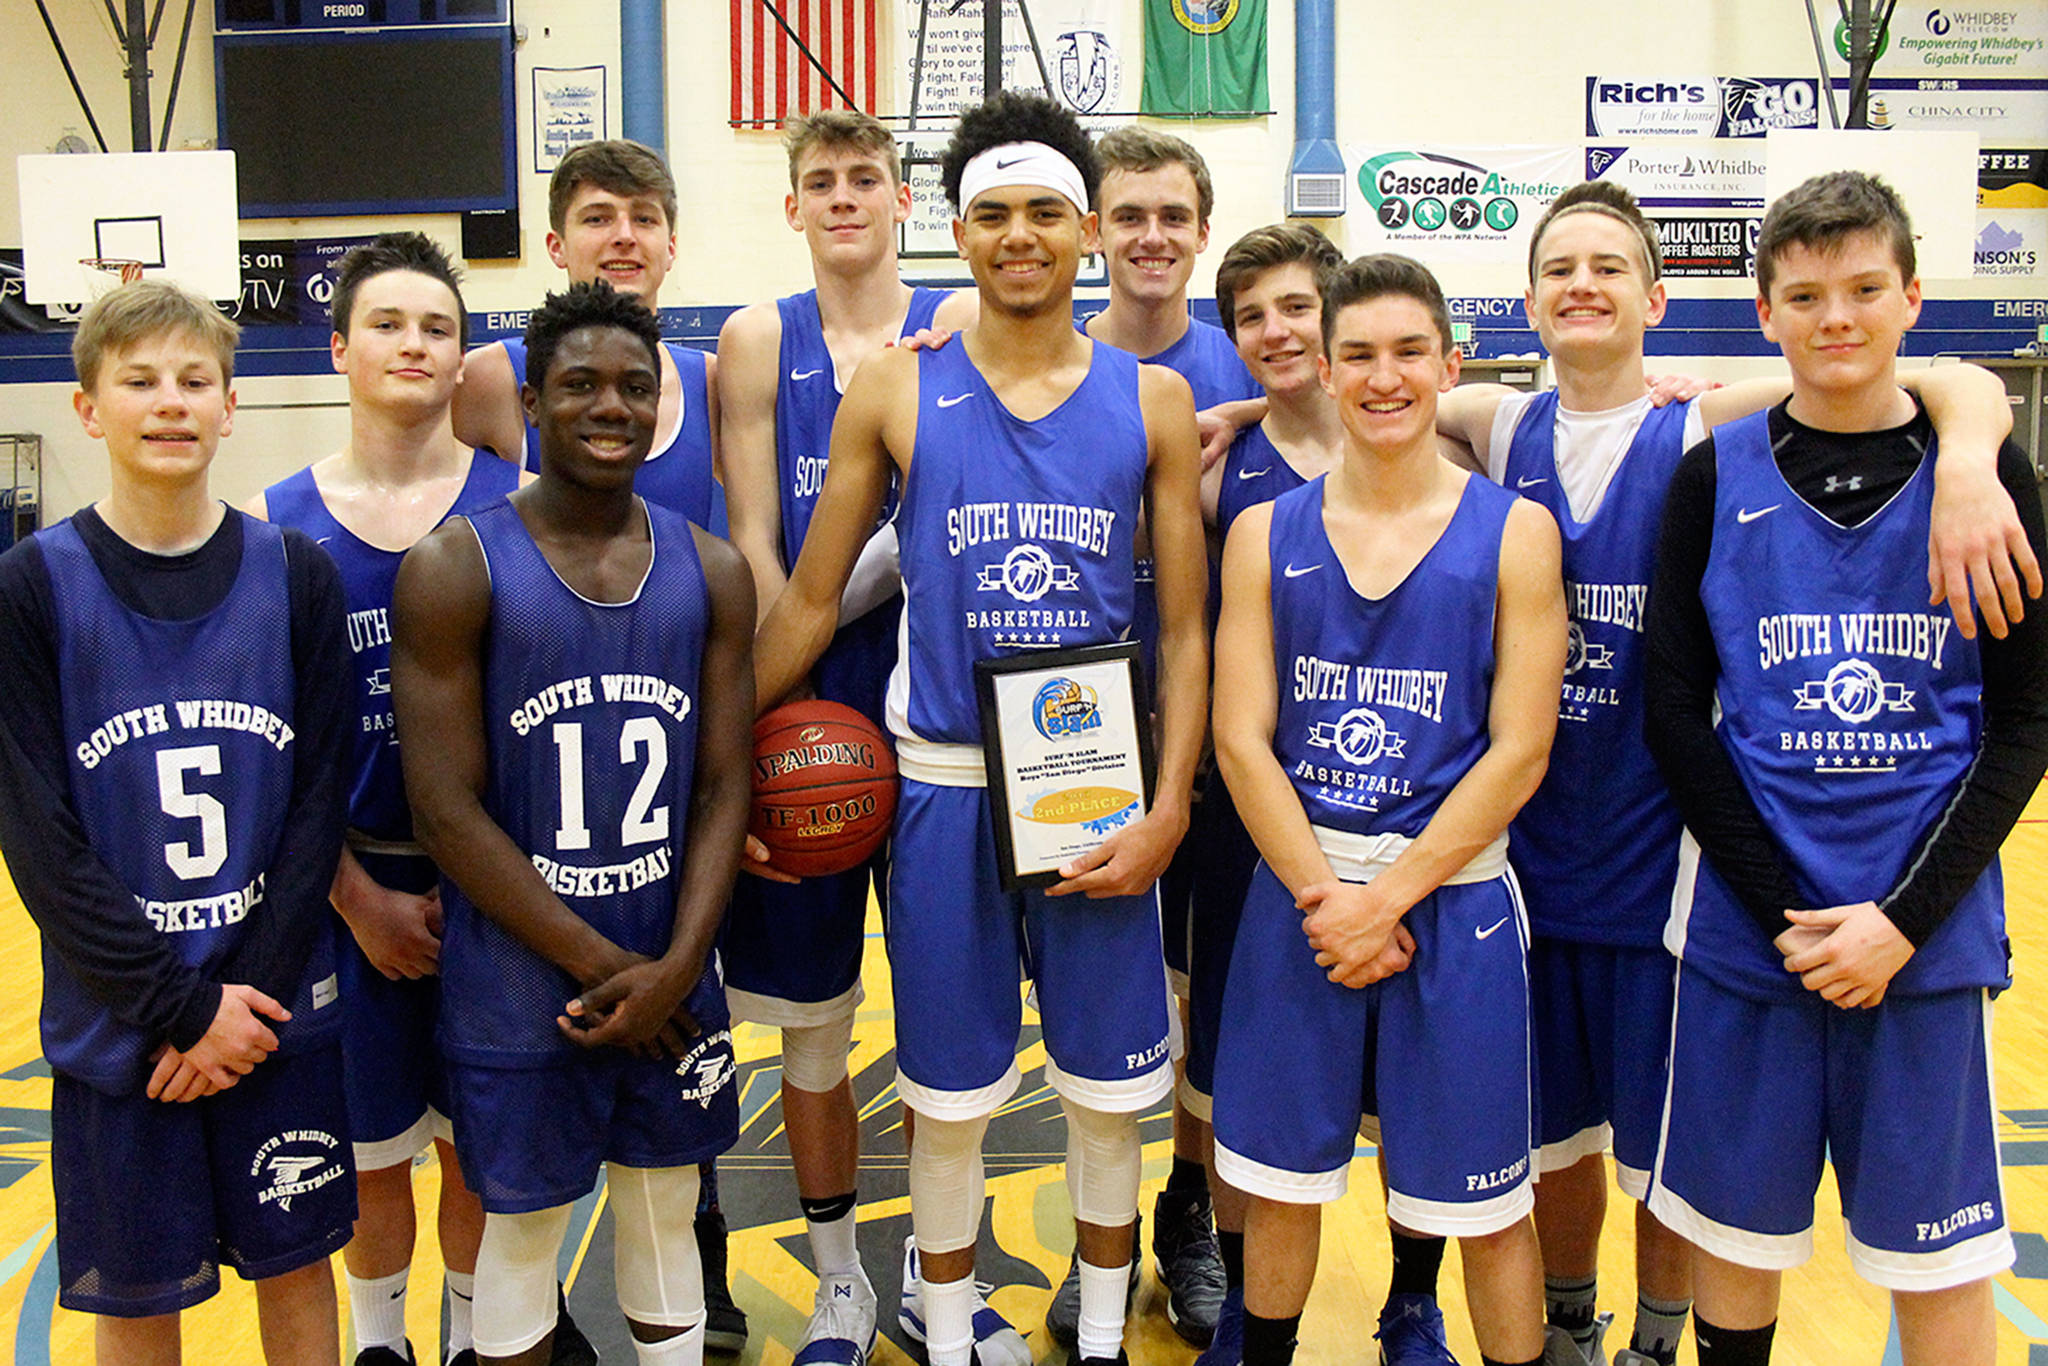 Boys basketball team goes 2-1, finish 2nd in California tournament